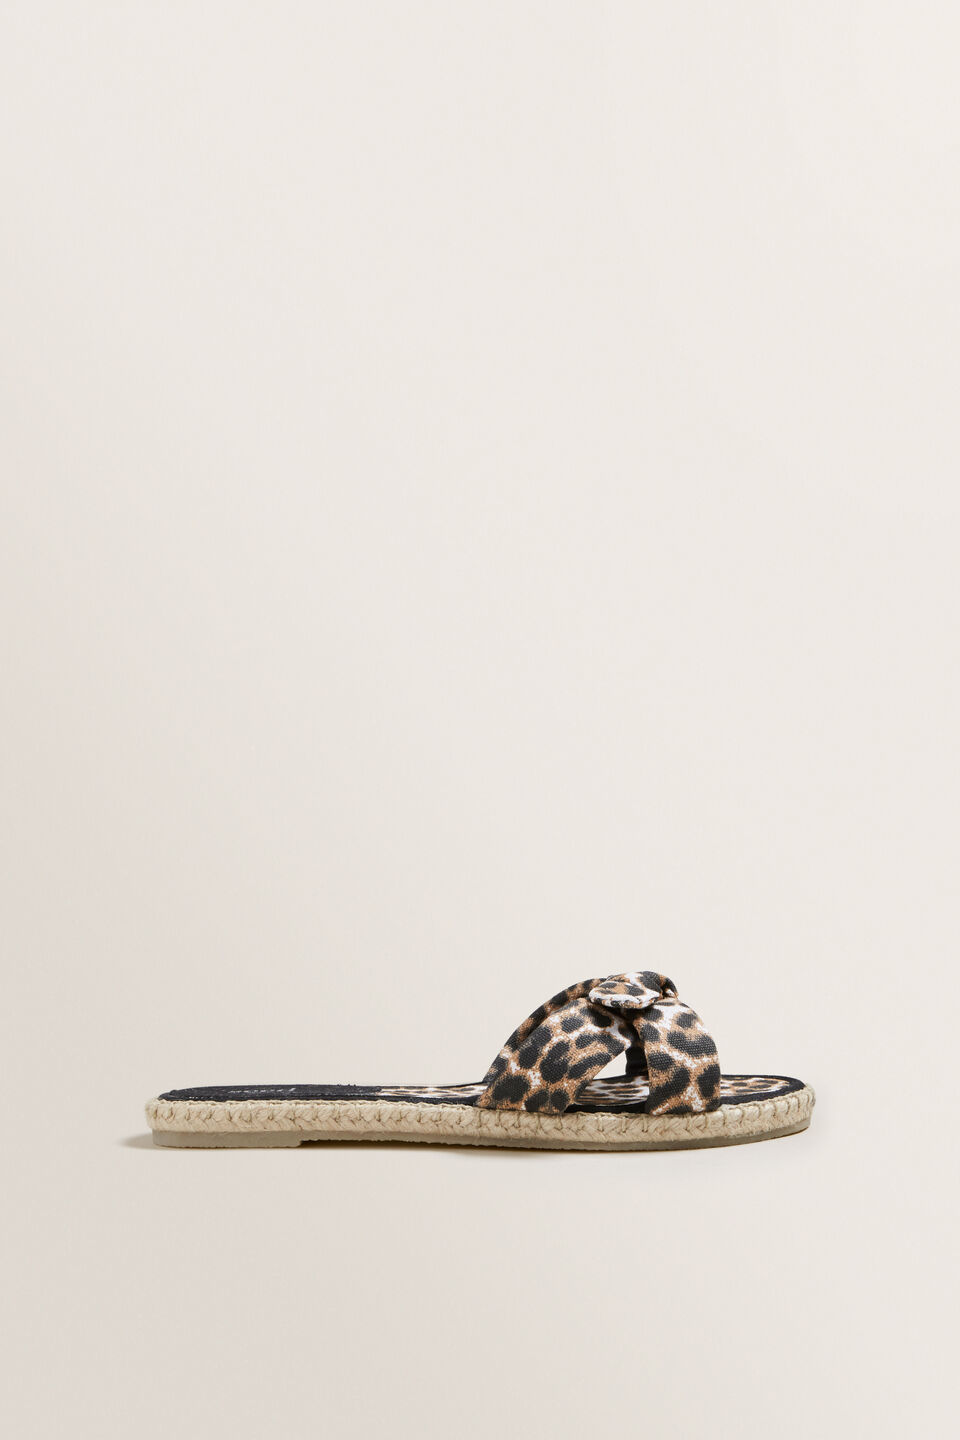 Milly Bow Espadrille  